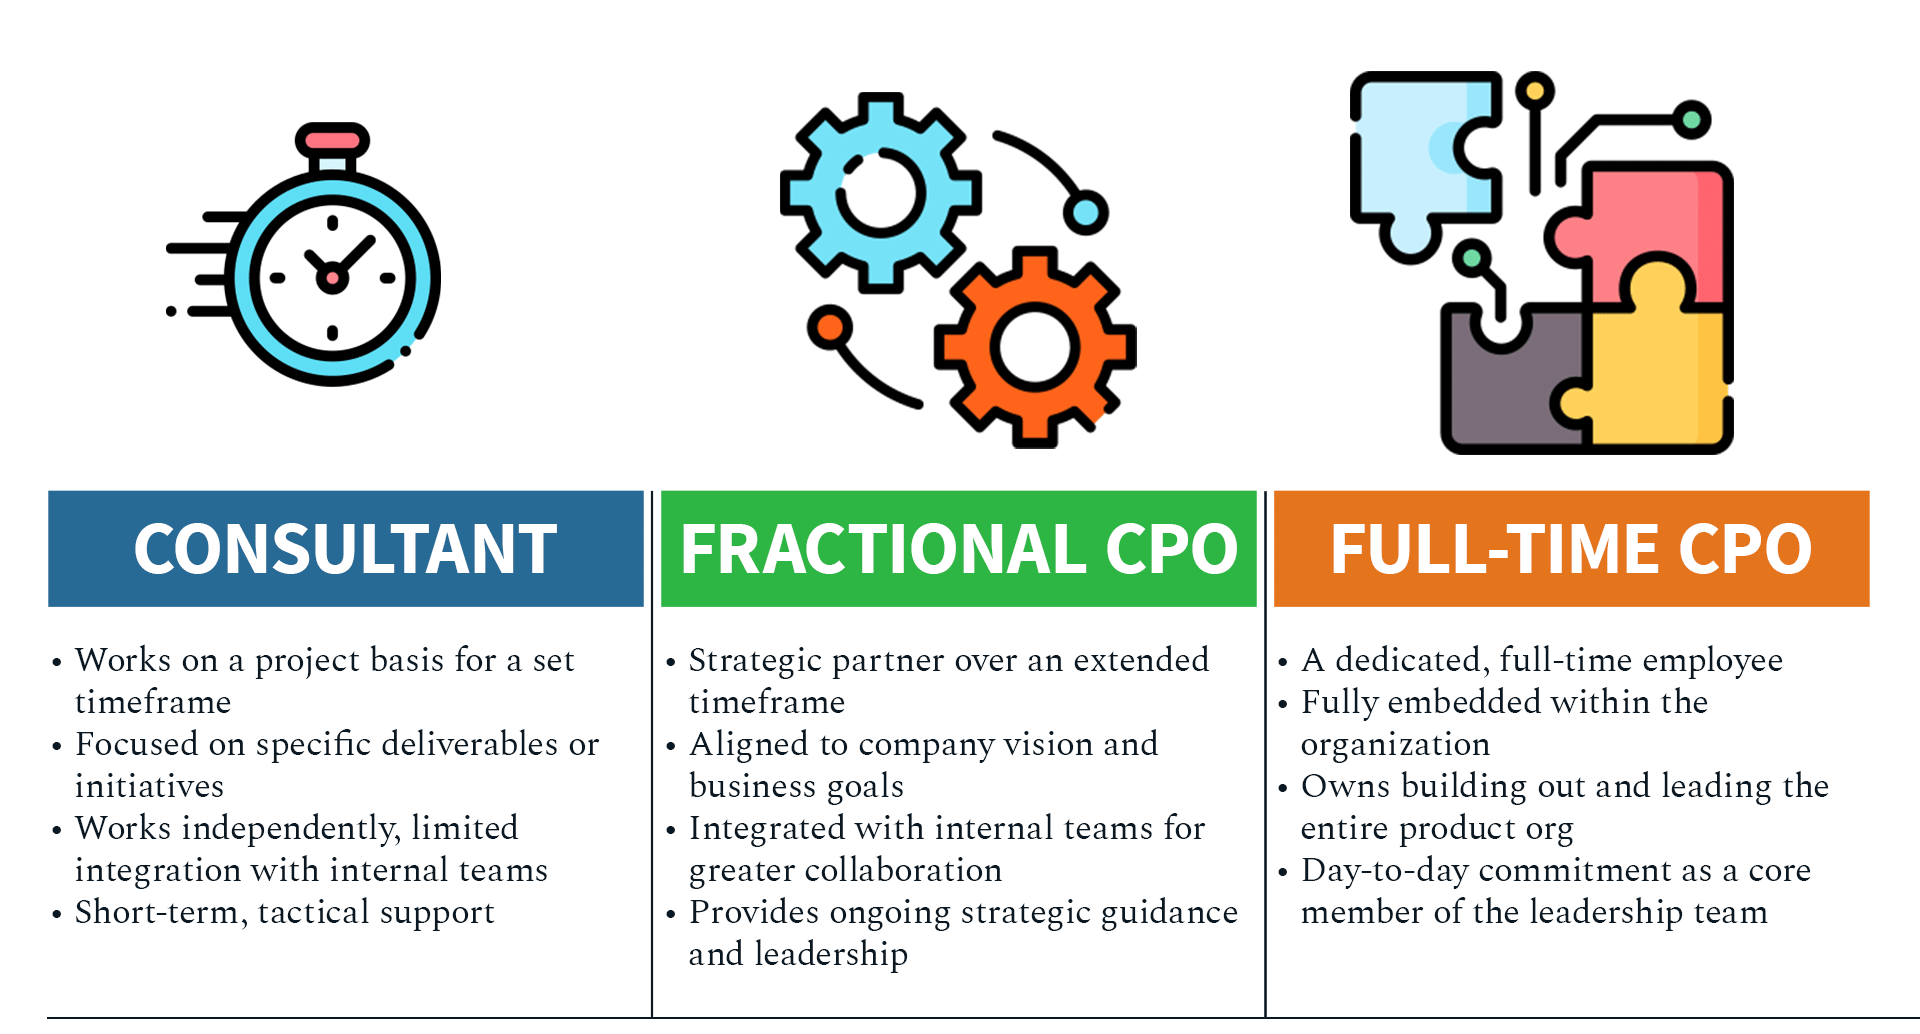 Comparing consultants, factional CPO, and full-time CPO